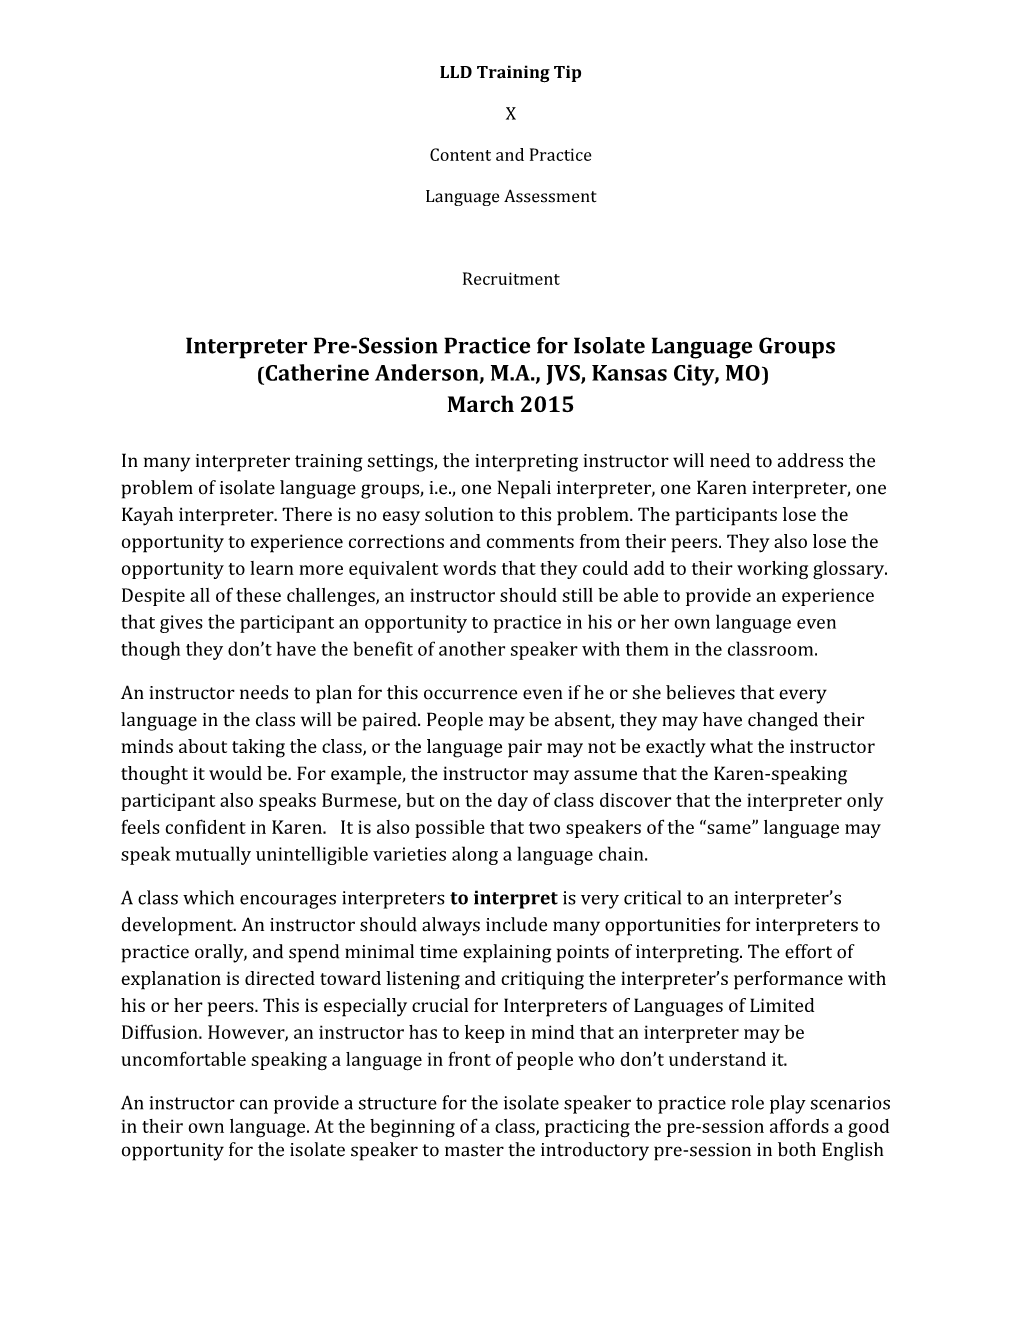 Interpreter Pre-Session Practice for Isolate Language Groups